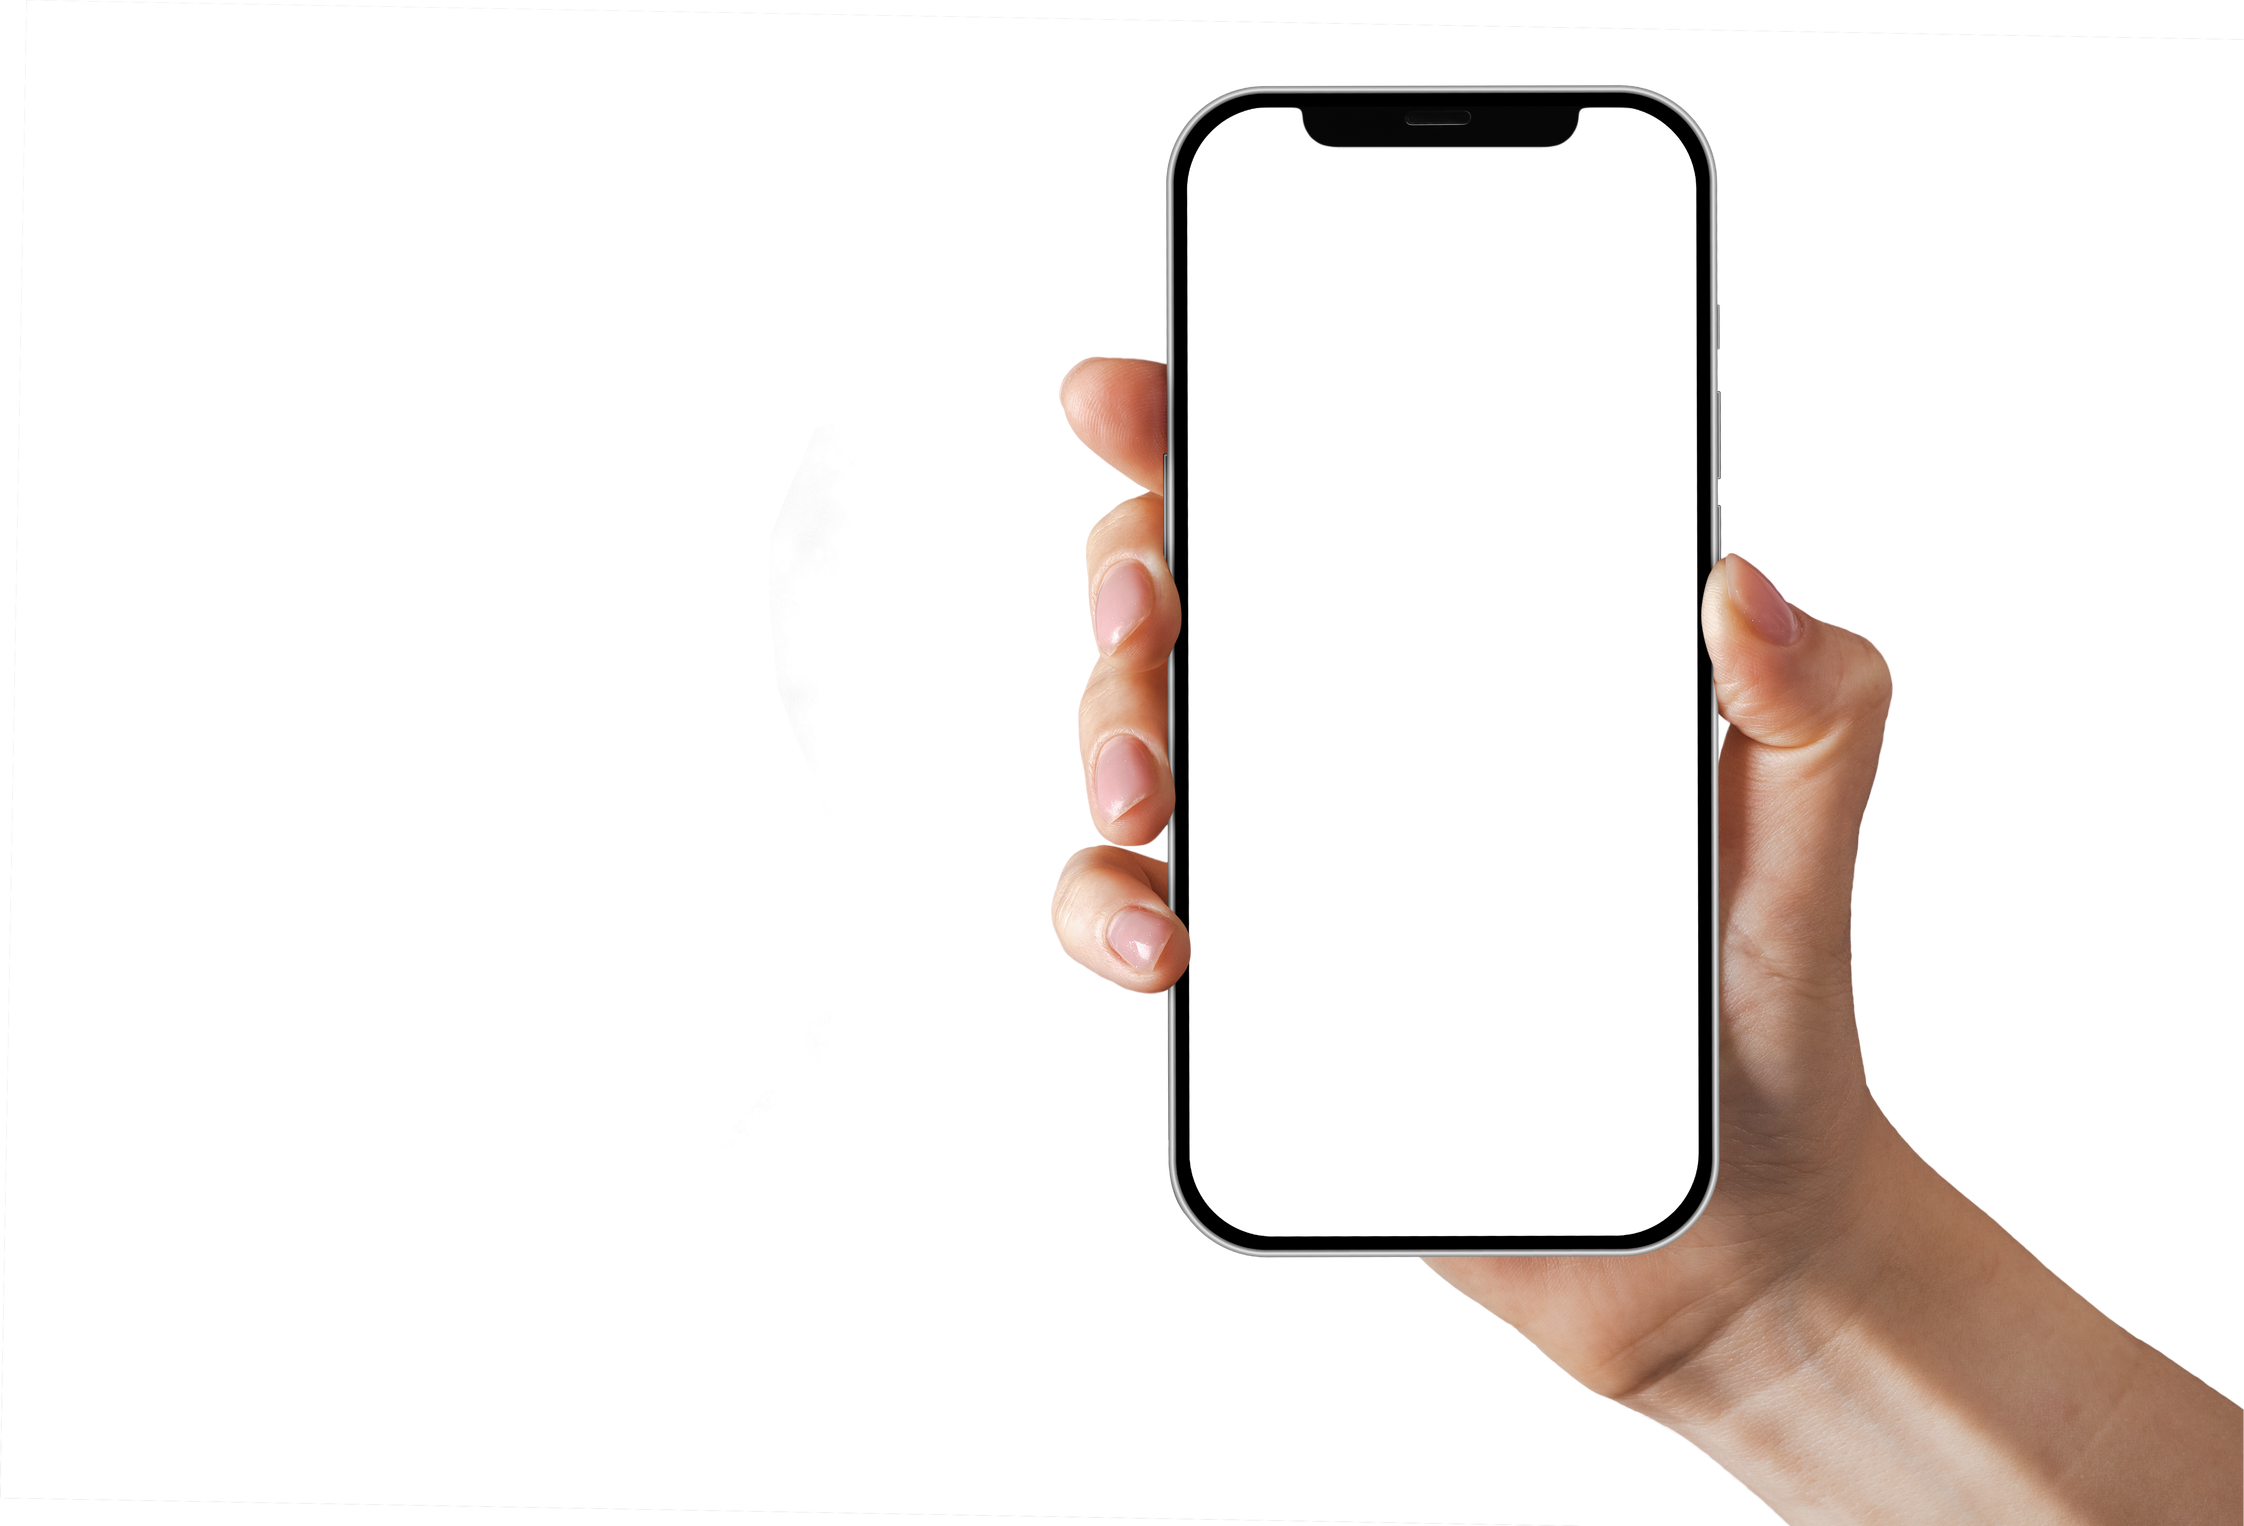 phone iphone advertisement on the png backgrounds